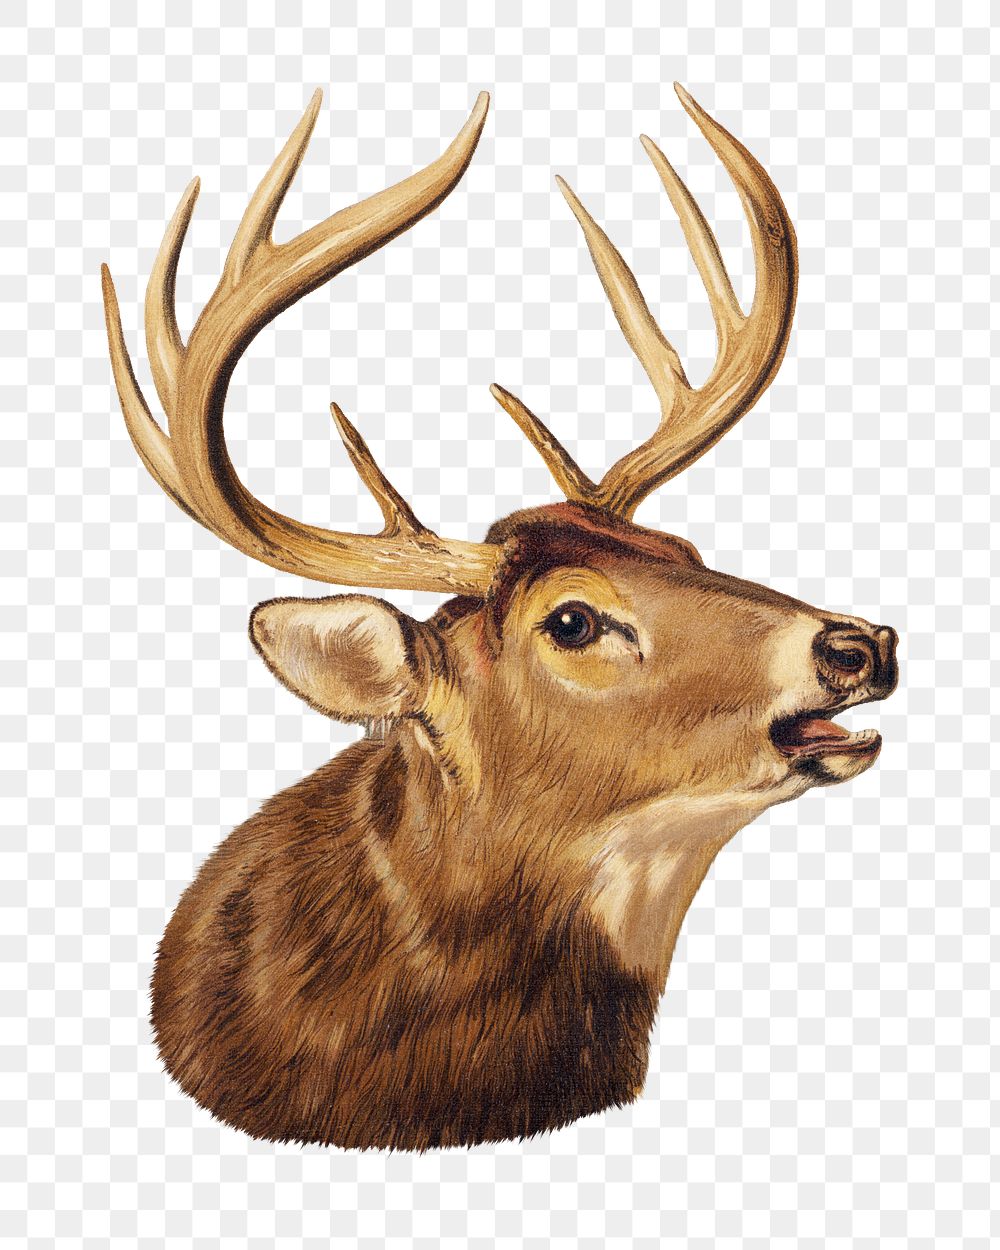 Vintage stag png sticker, animal on transparent background.   Remastered by rawpixel